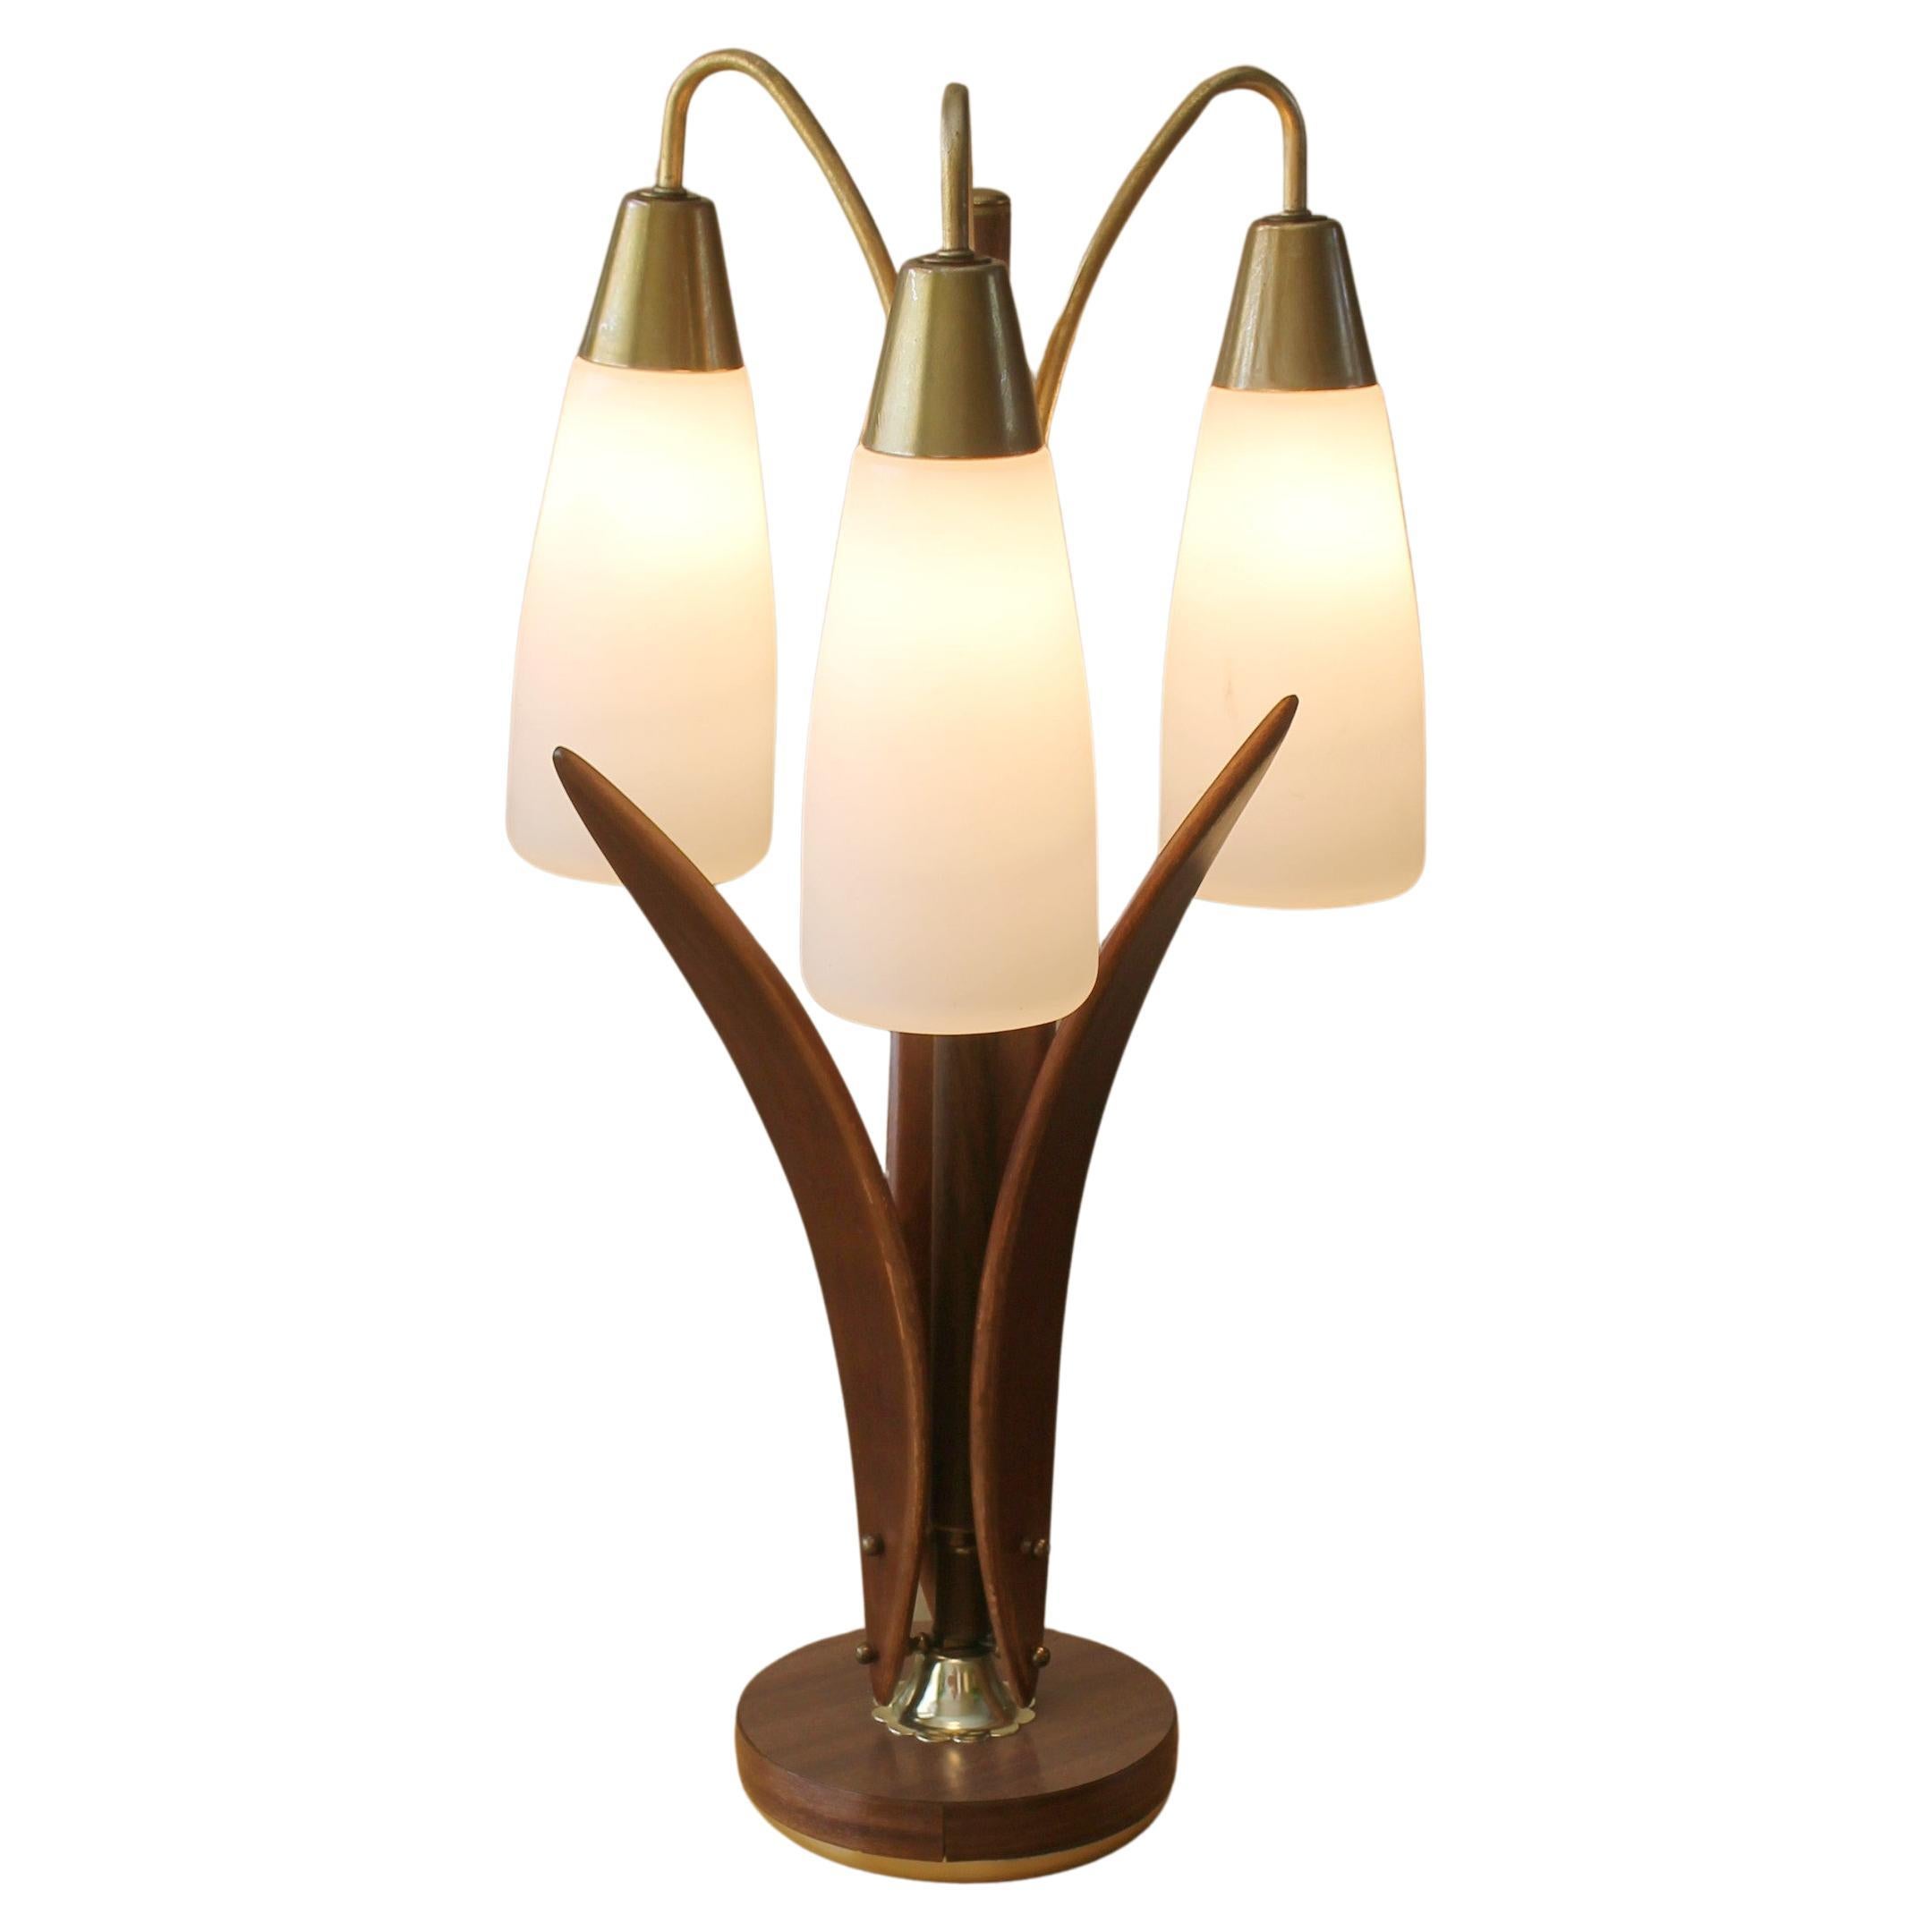 Exquisite Danish Modern 3 Shade Glass and Walnut Lamp 1950s Mid Century Lighting For Sale